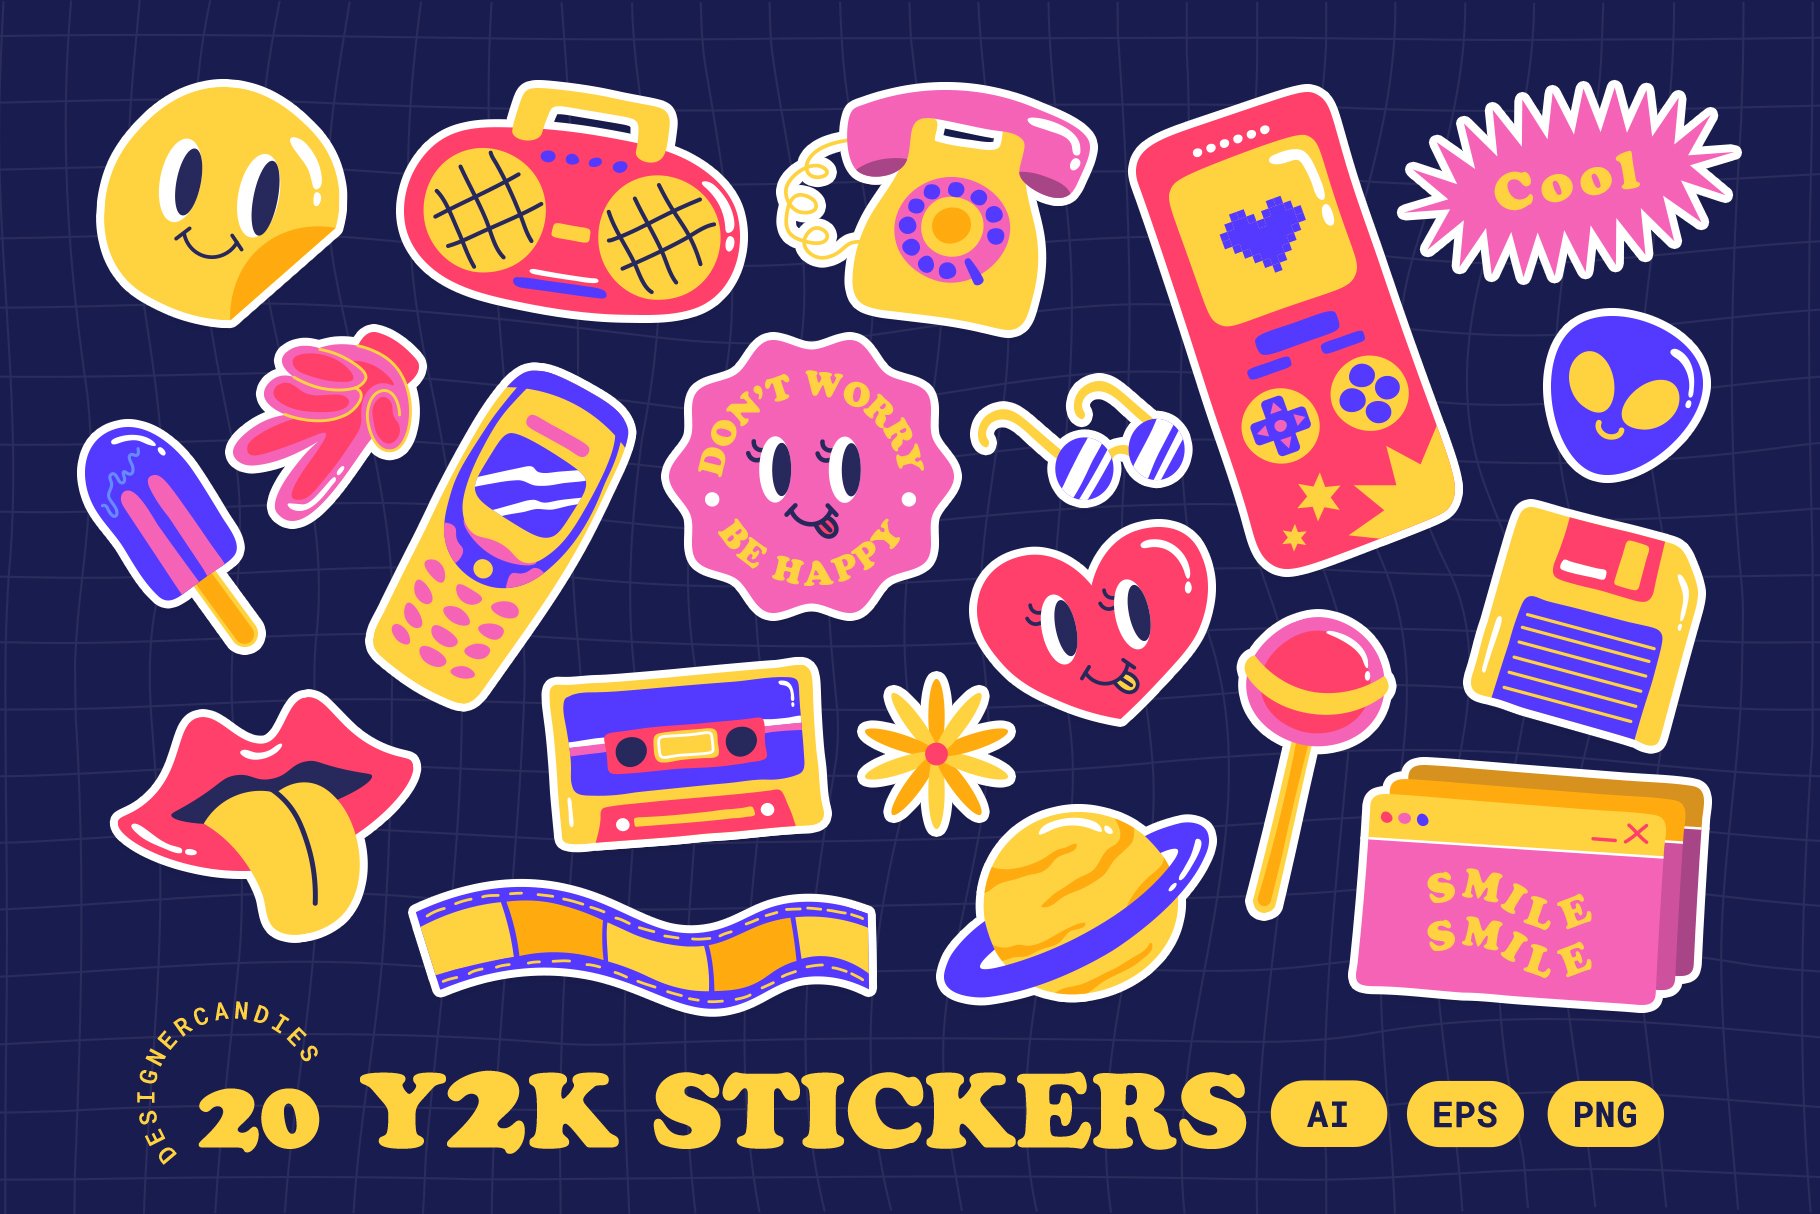 Y2K Inspired cute y2k stickers For Your Nostalgic and Aesthetic Needs